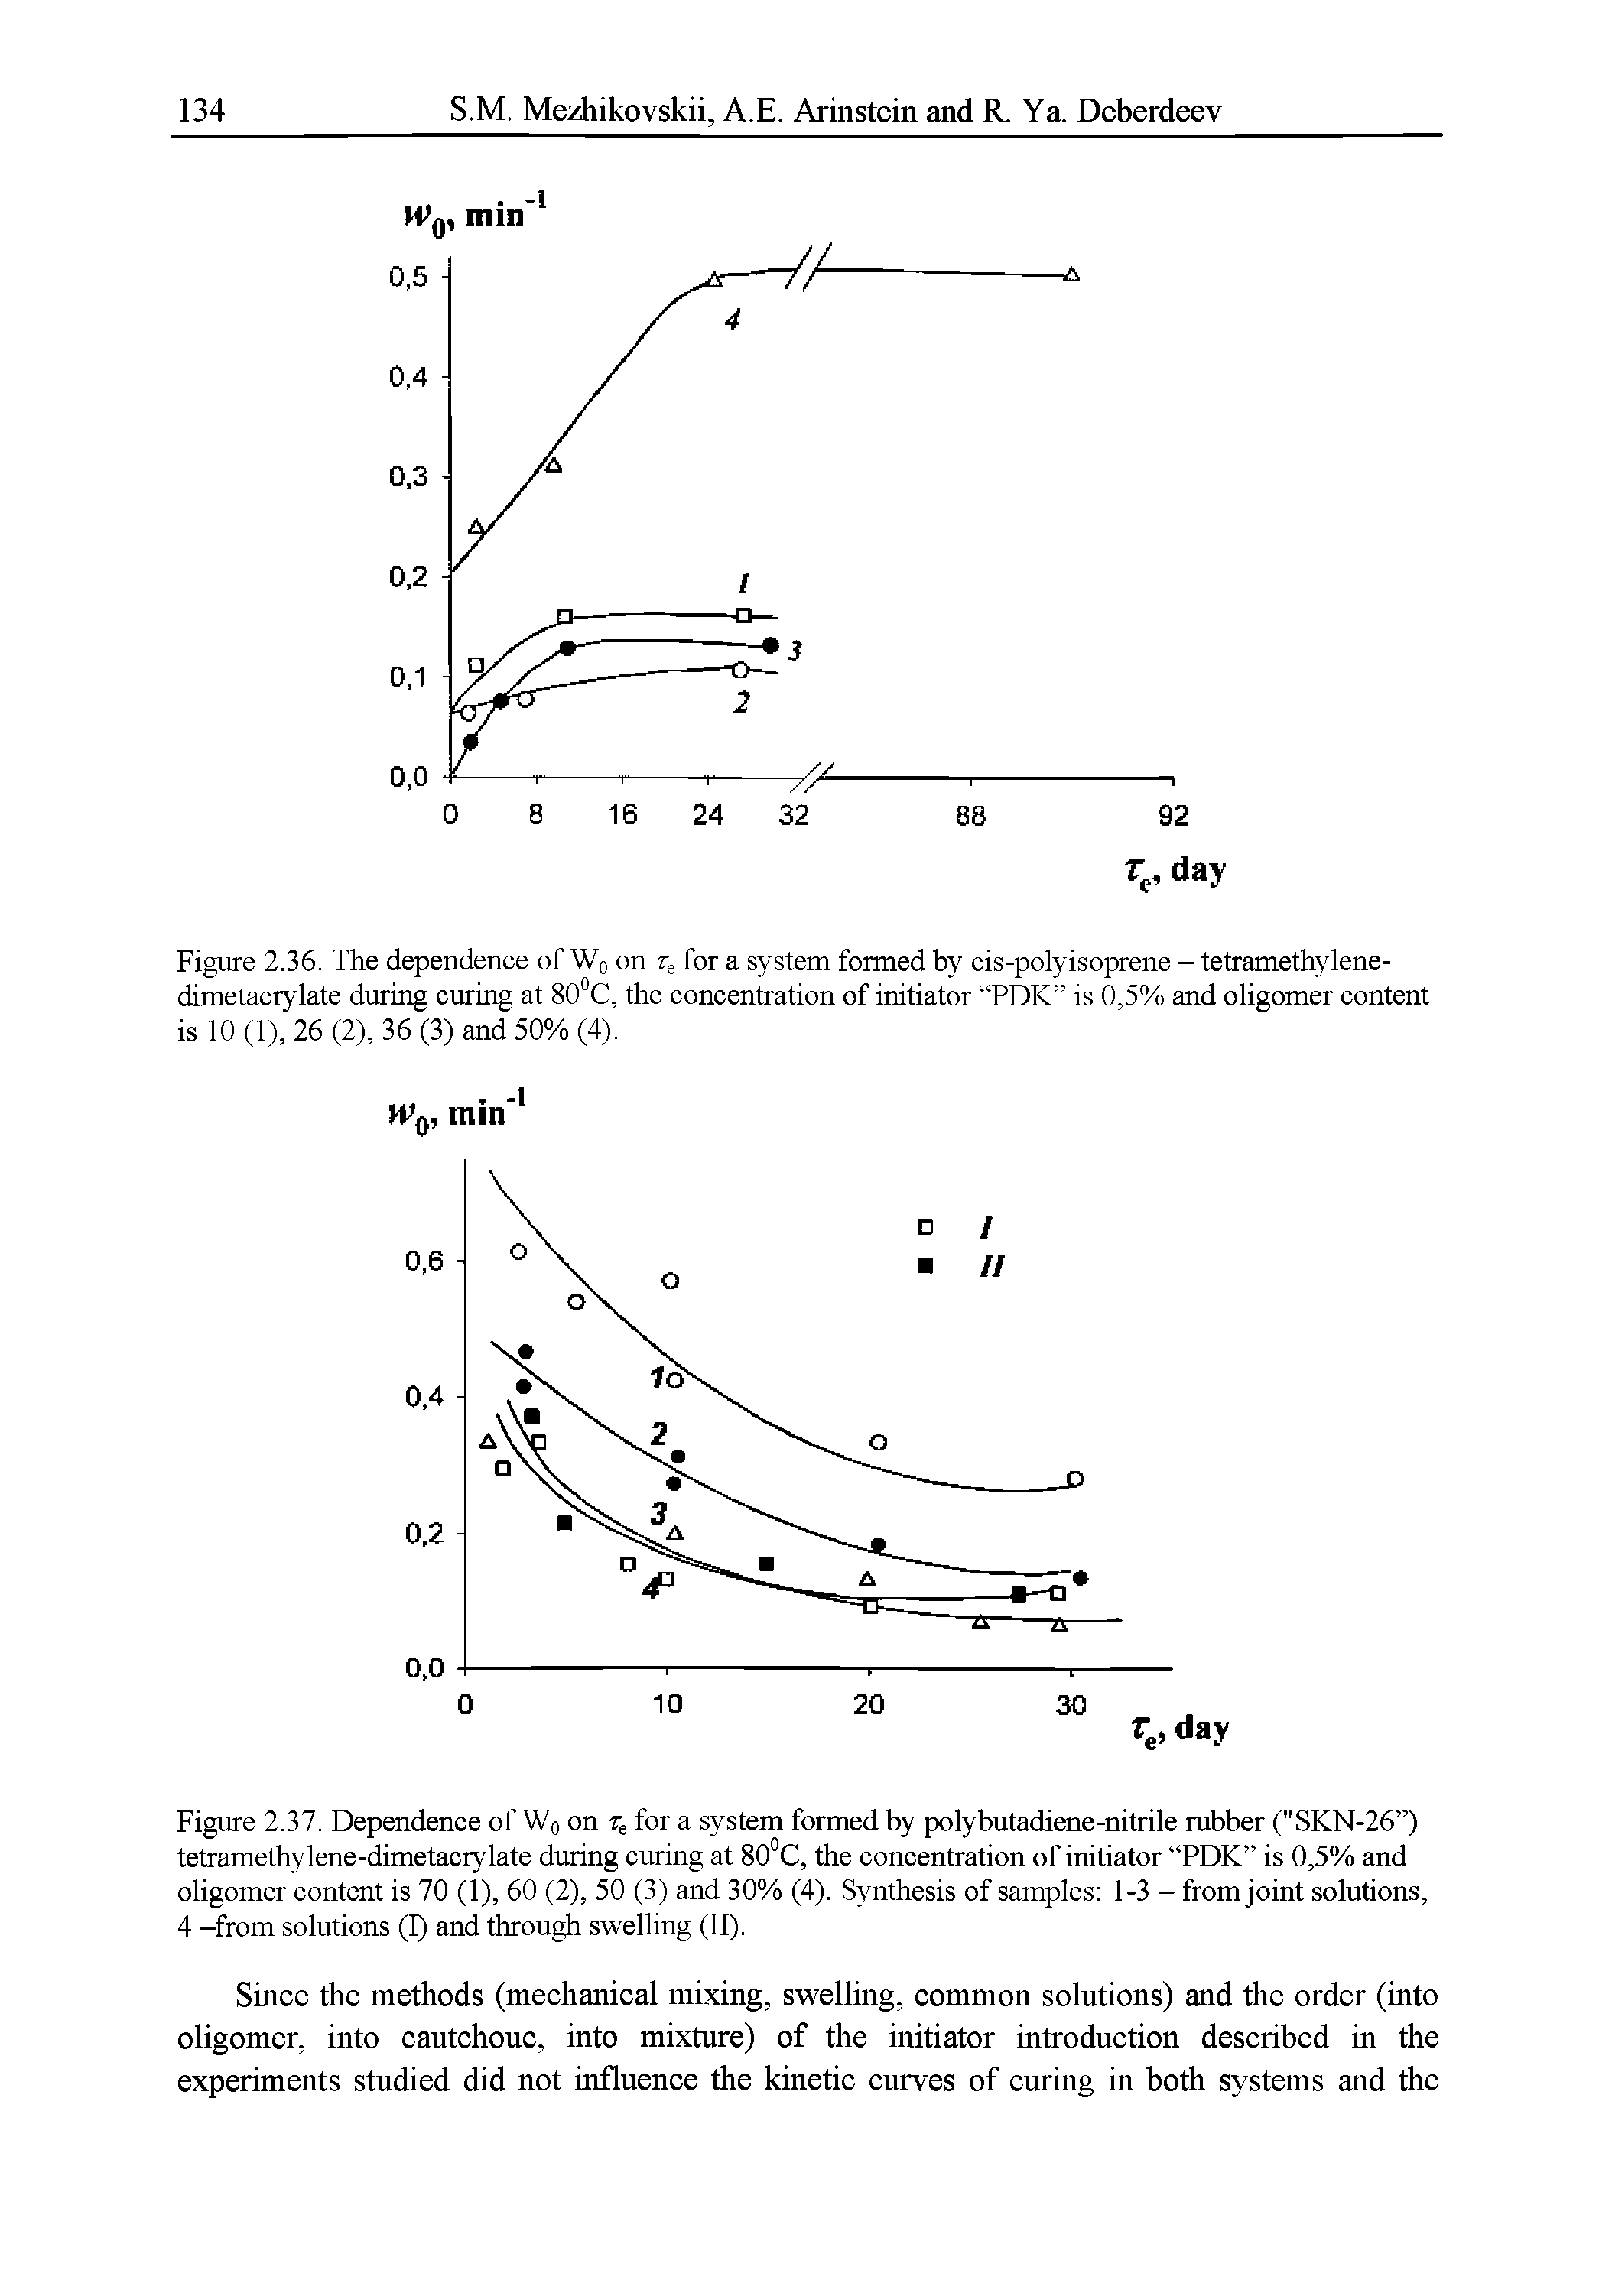 Figure 2.37. Dependence of Wq on for a system formed by polybutadiene-nitrile rubber ("SKN-26 ) tetramethylene-dimetacrylate during curing at 80°C, the concentration of initiator PDK is 0,5% and oligomer content is 70 (1), 60 (2), 50 (3) and 30% (4). Synthesis of samples 1-3 - from joint solutions, 4 -from solutions (I) and through swelling (II).